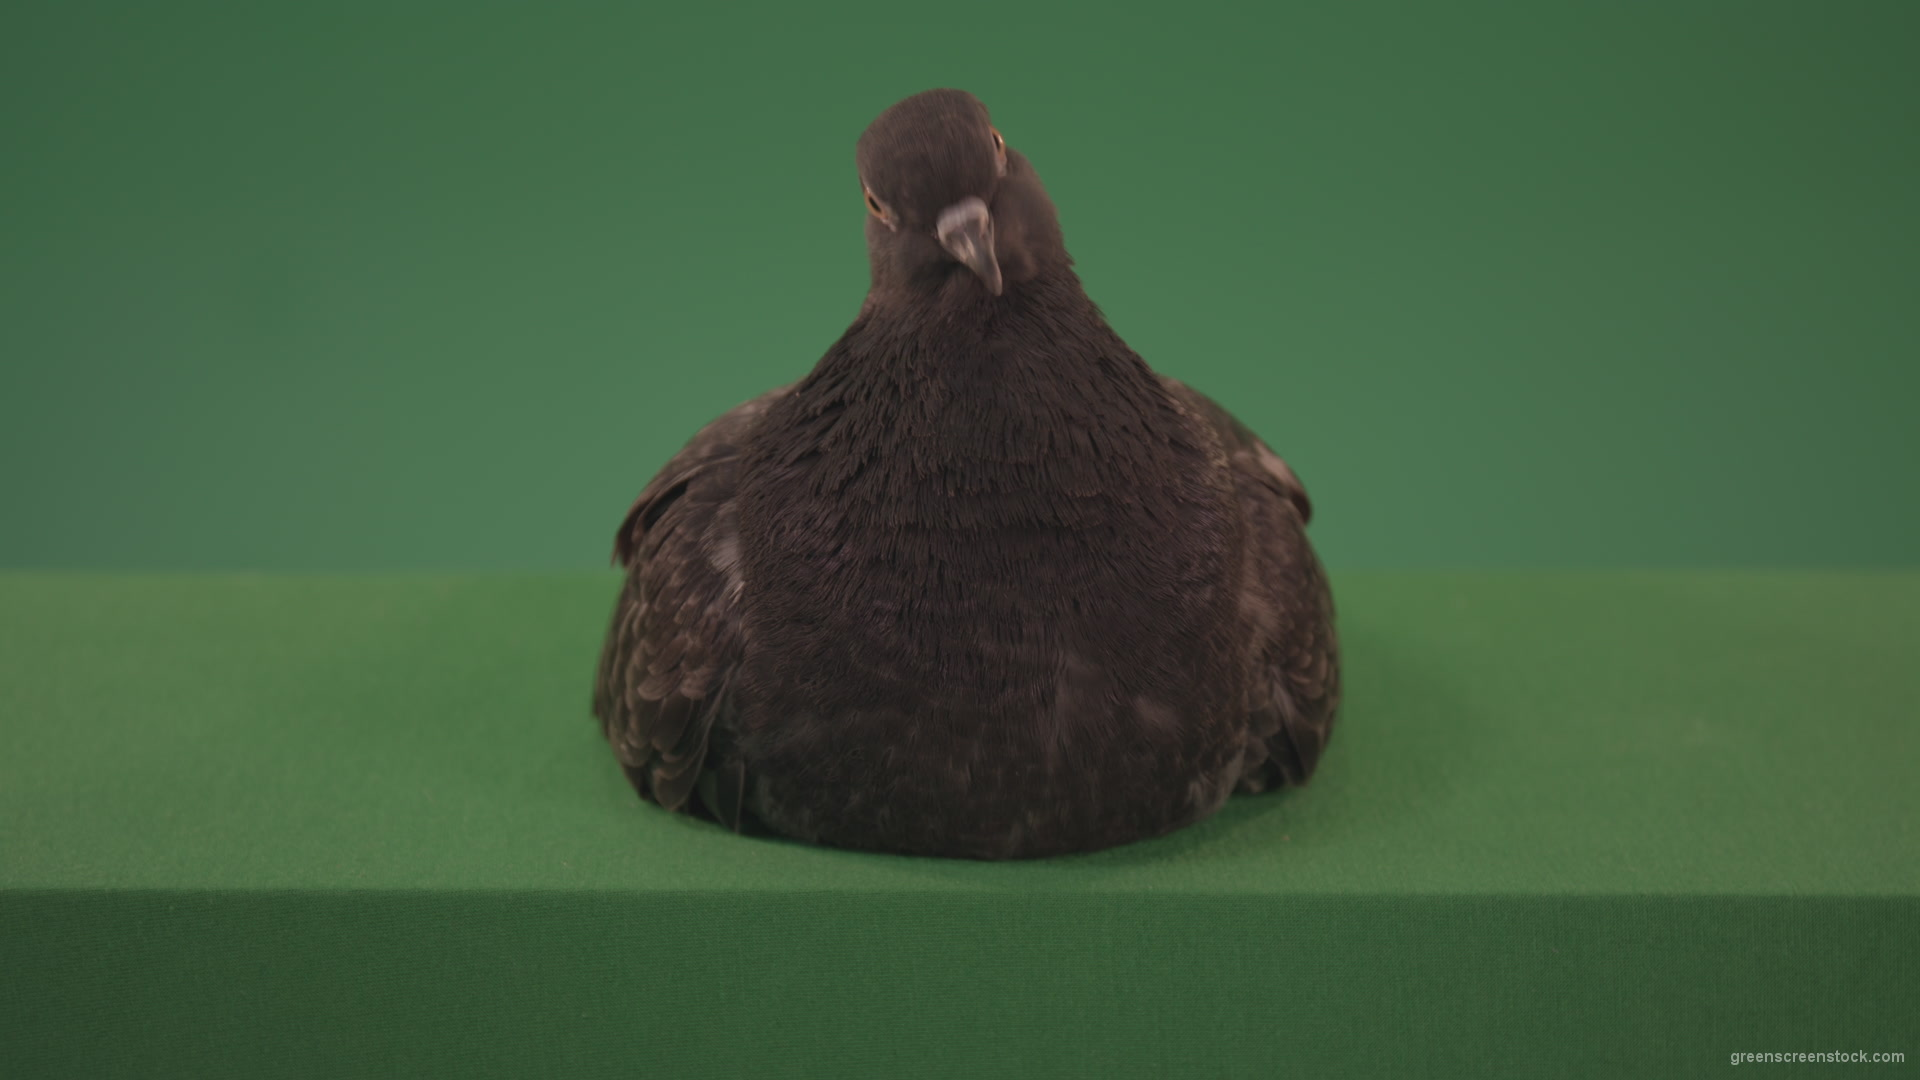 Bird-came-to-rest-staring-around-and-brushing-its-feathers-isolated-on-chromakey-background_004 Green Screen Stock